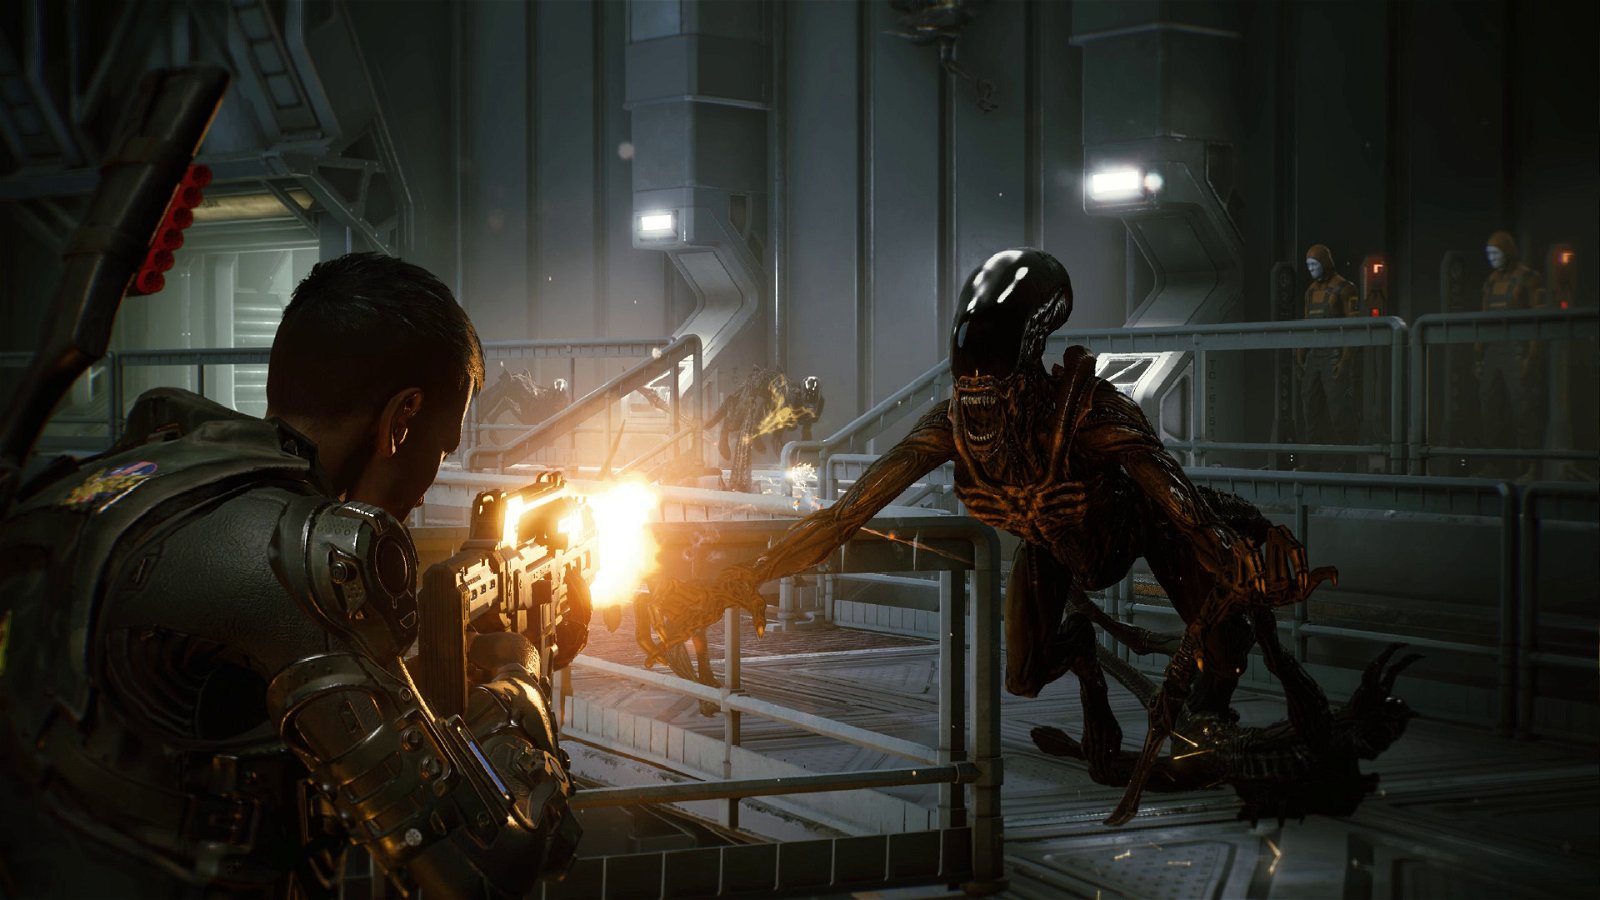 Aliens Fireteam Elite coming to PC and Consoles on August 24